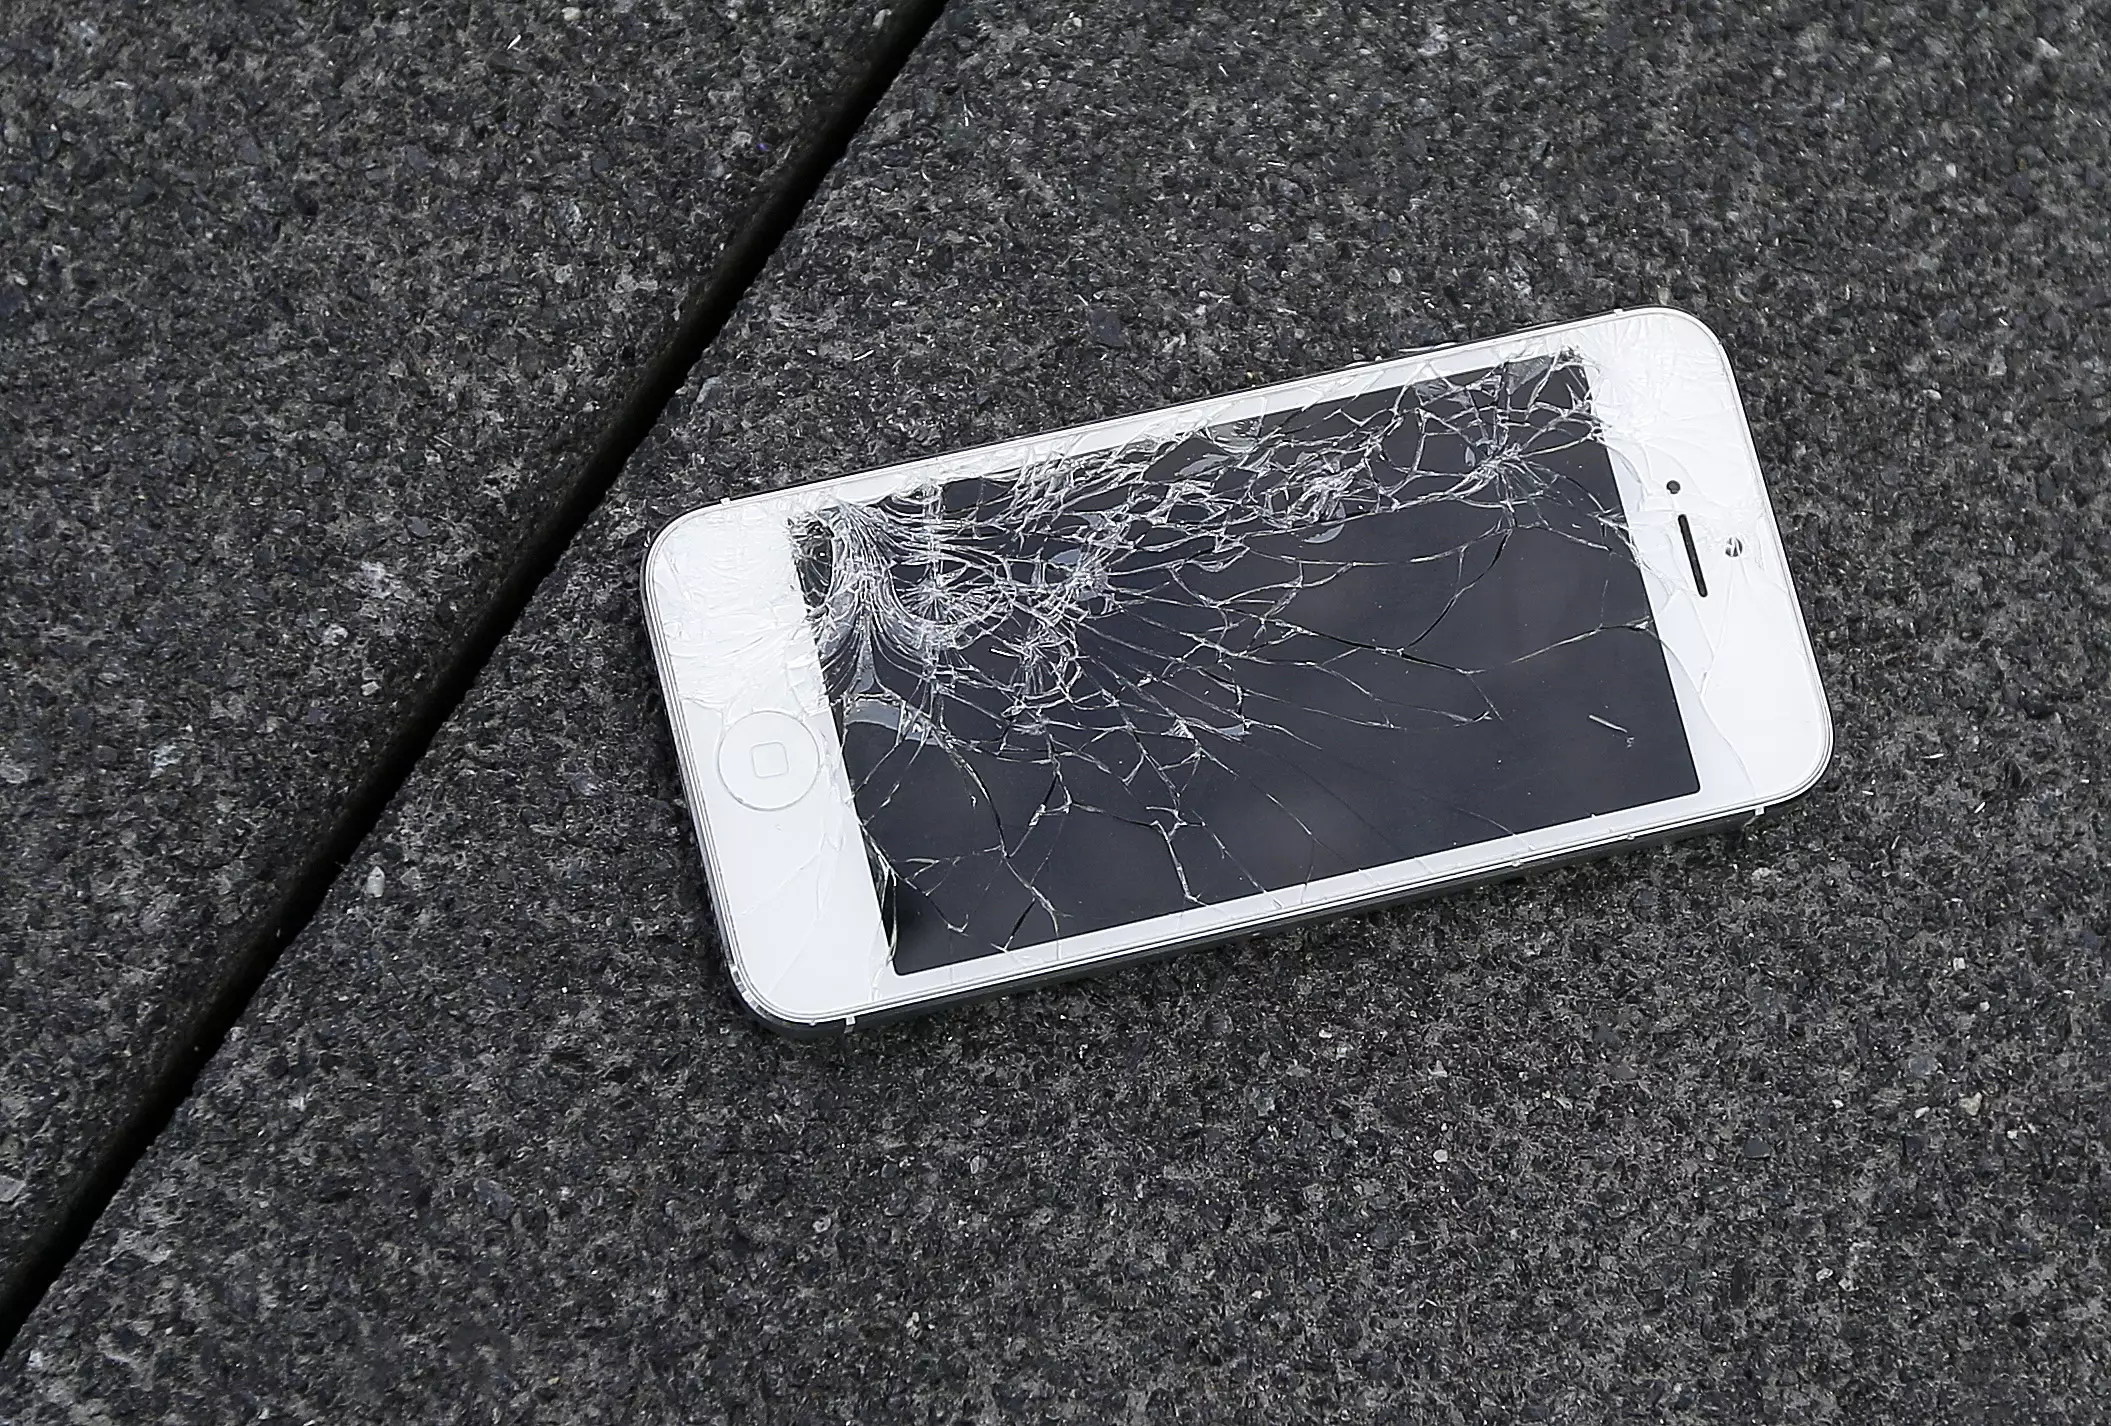 UK Scientists May Have Just Created An ‘Unbreakable’ Mobile Phone Screen